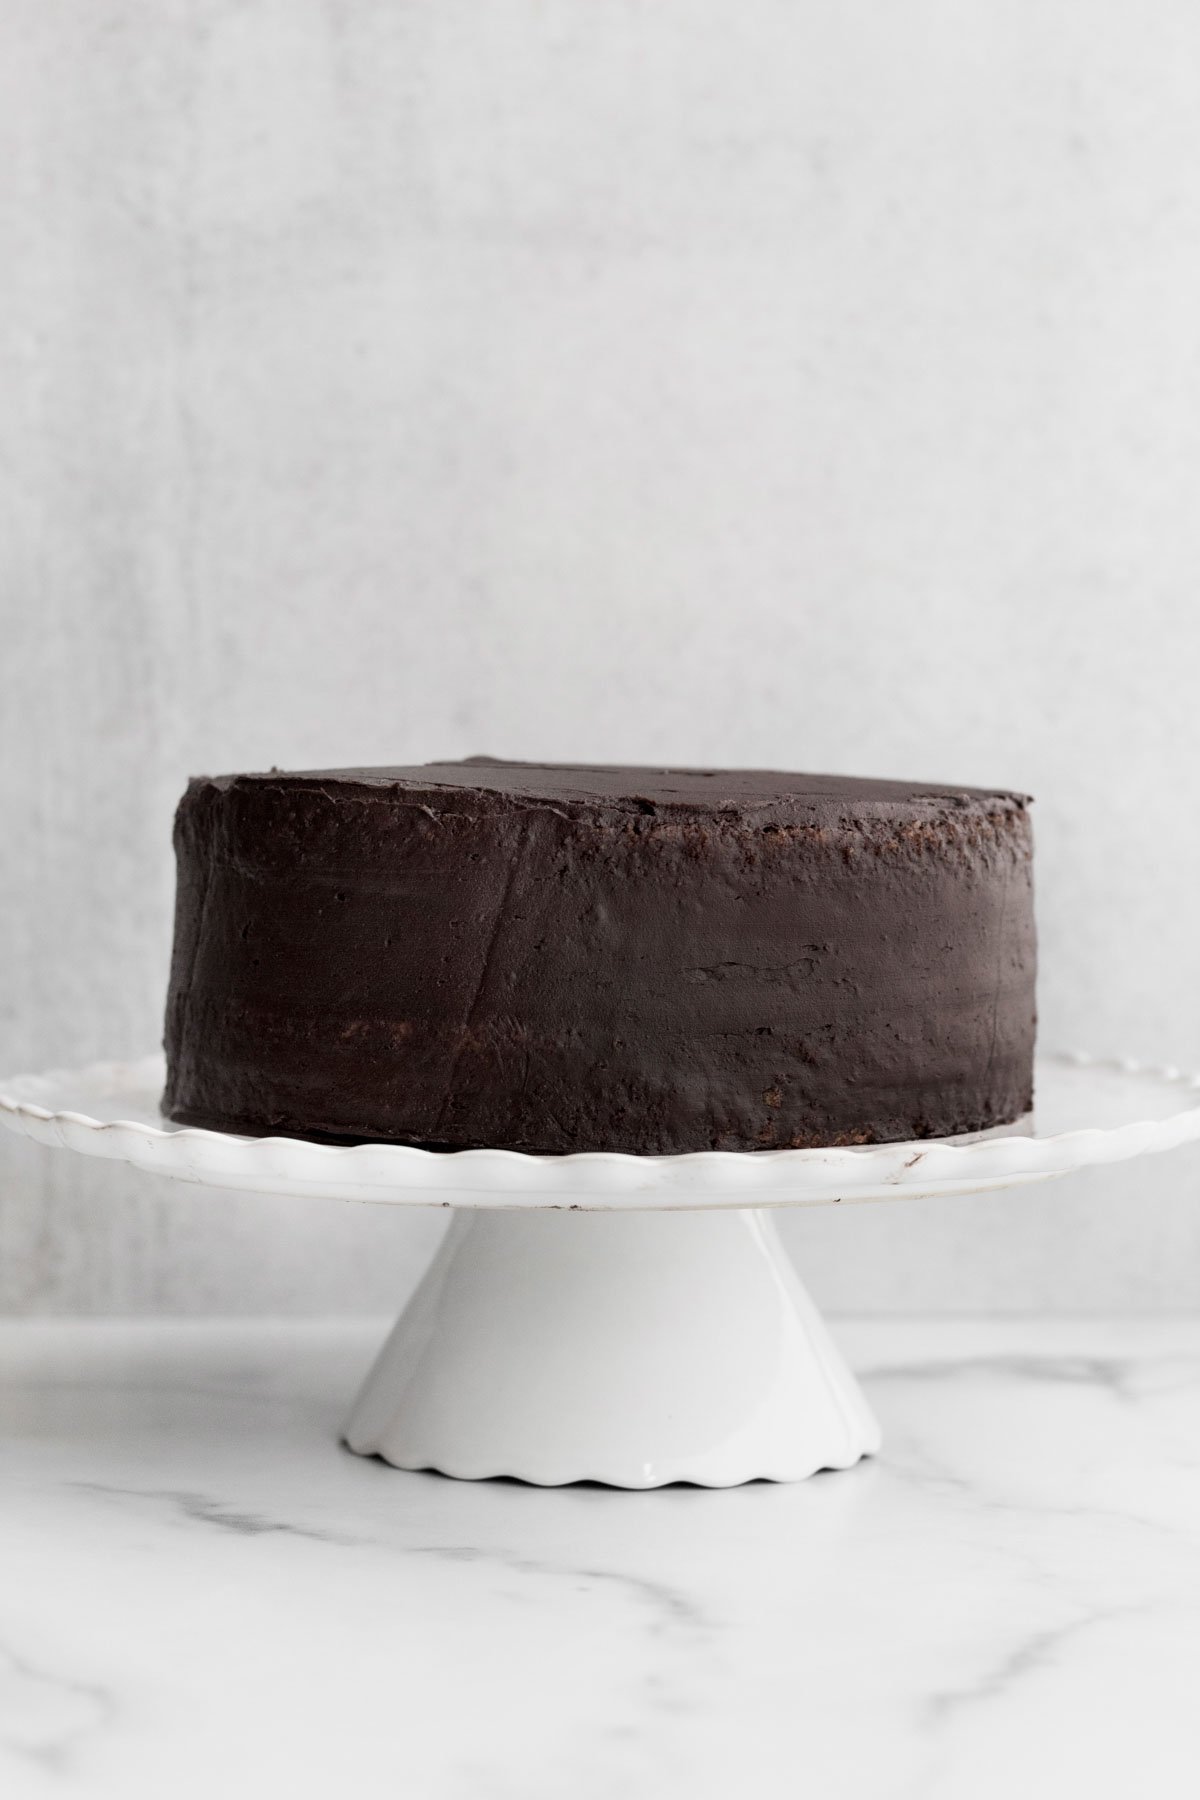 Chocolate cake on a cake stand thinly frosted with chocolate.